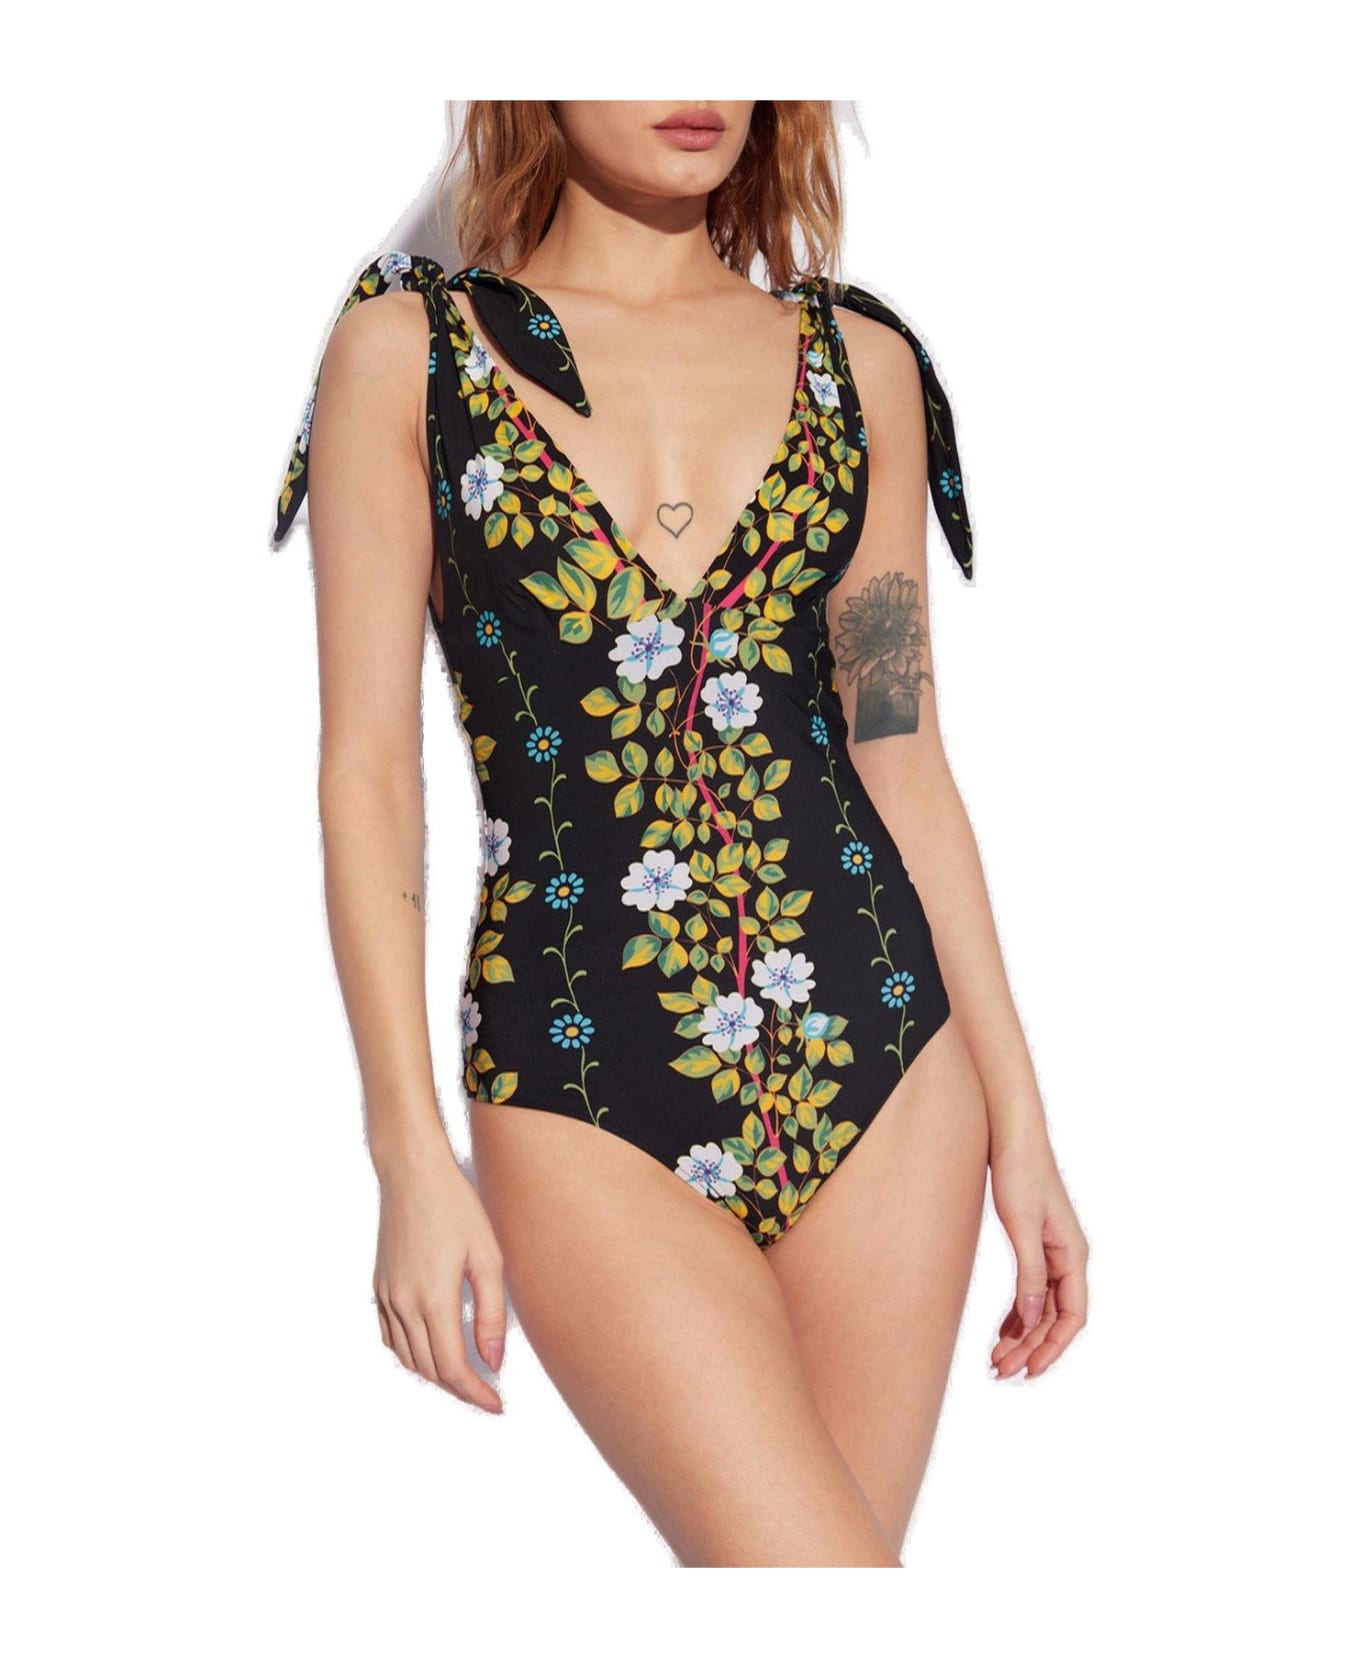 Etro Floral Printed One-piece Swimsuit - Black